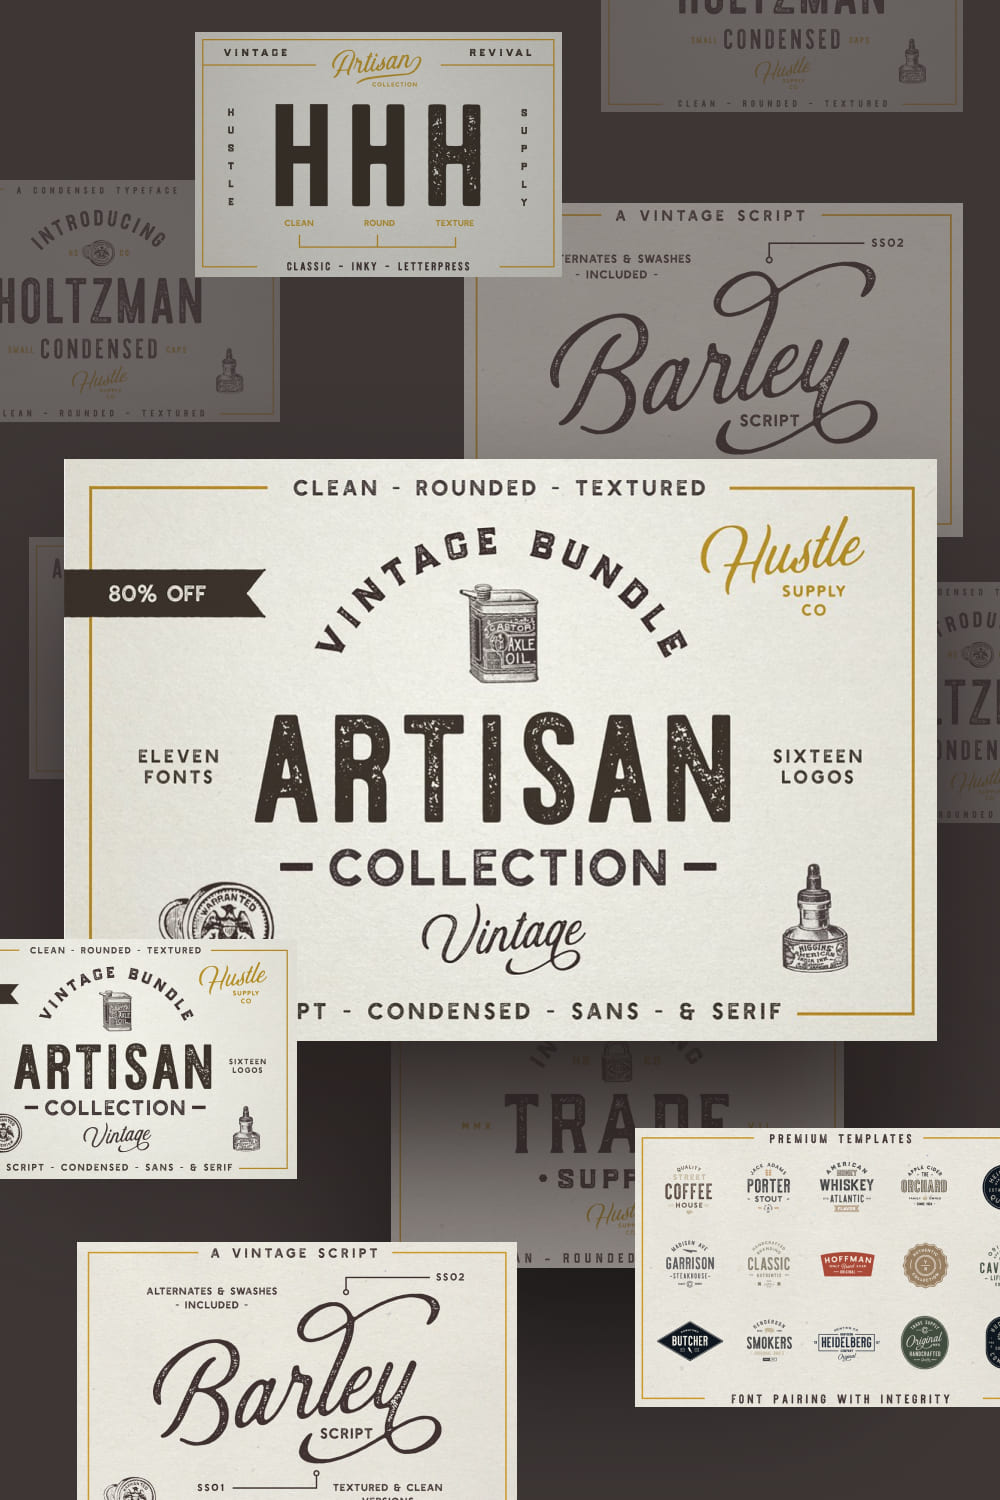 the artisan collection pinterest image.